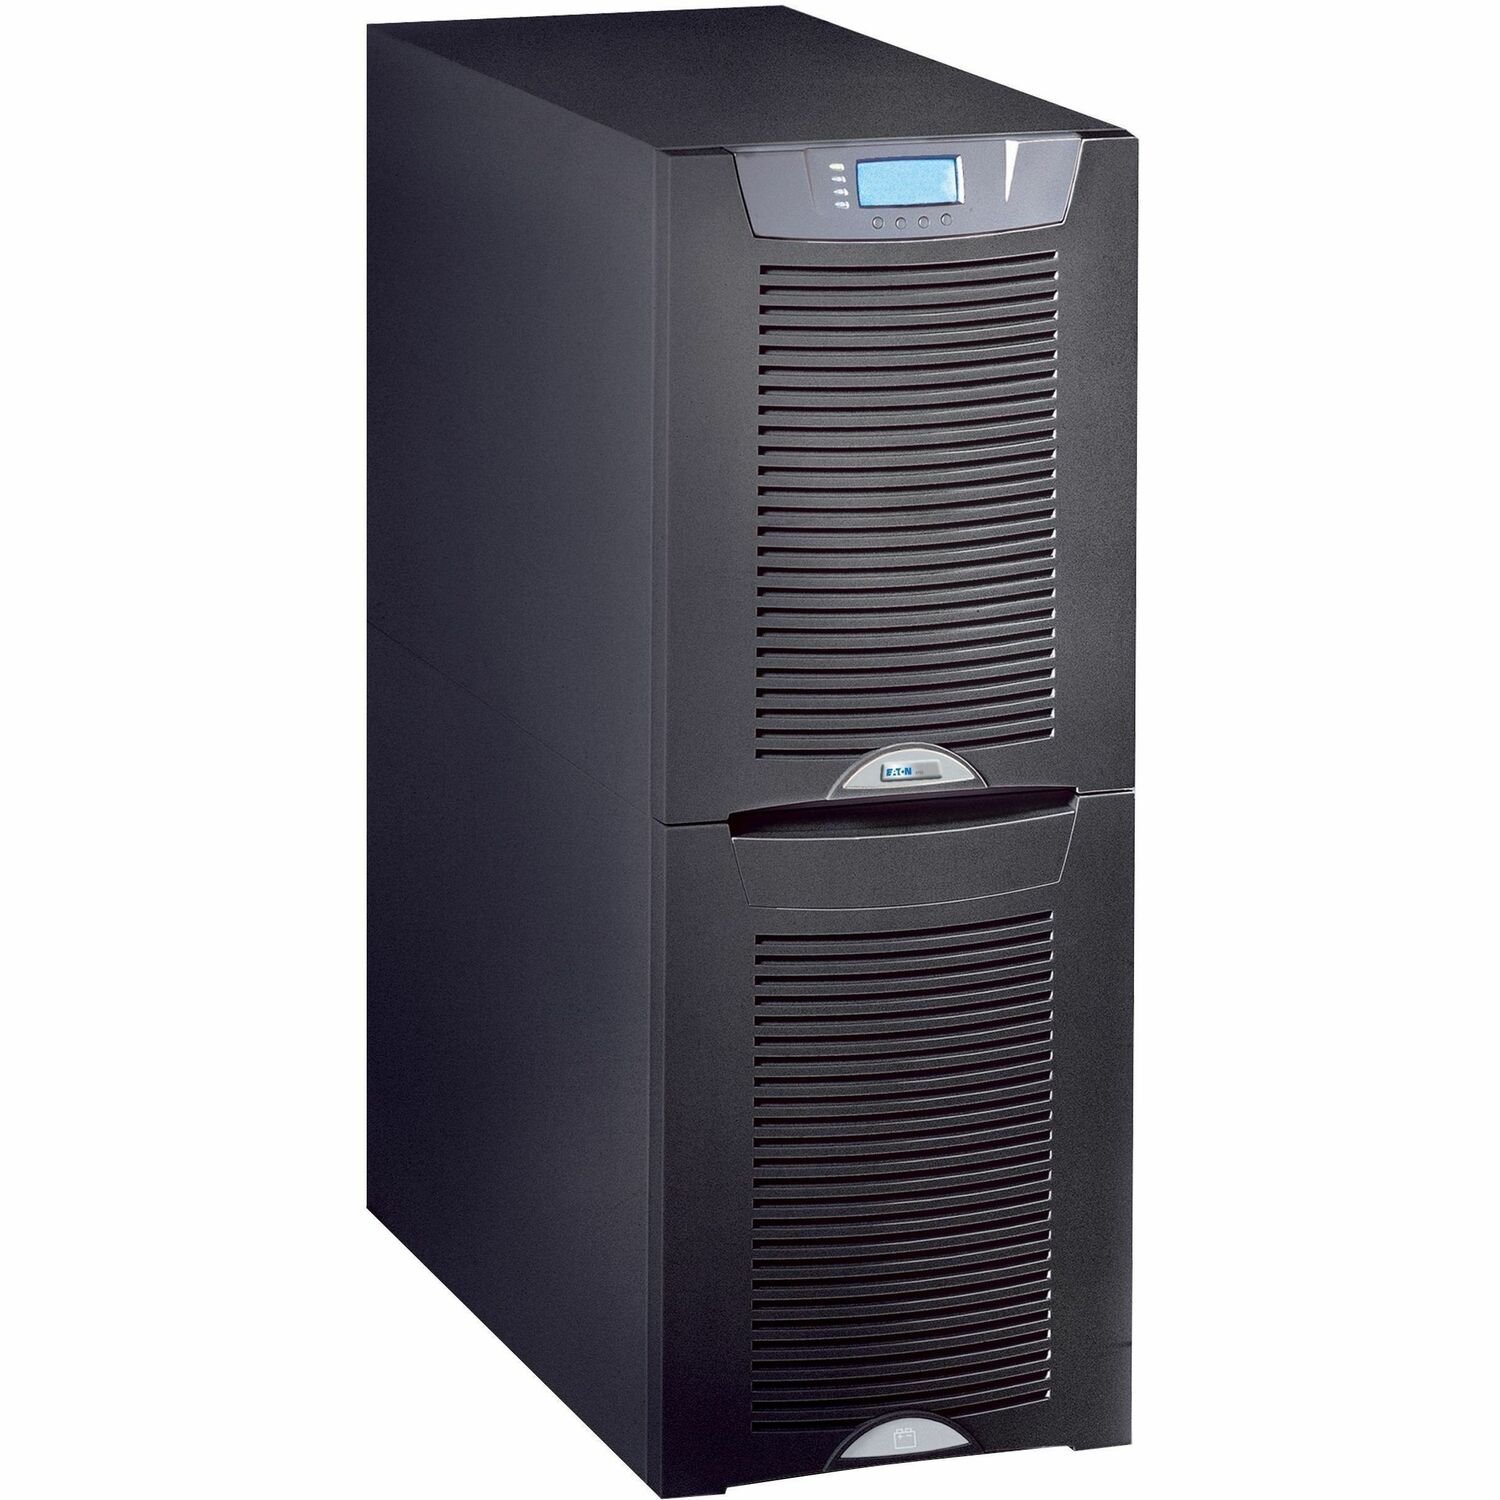 Eaton 915510IN25 Double Conversion Online UPS - 10 kVA - Single Phase